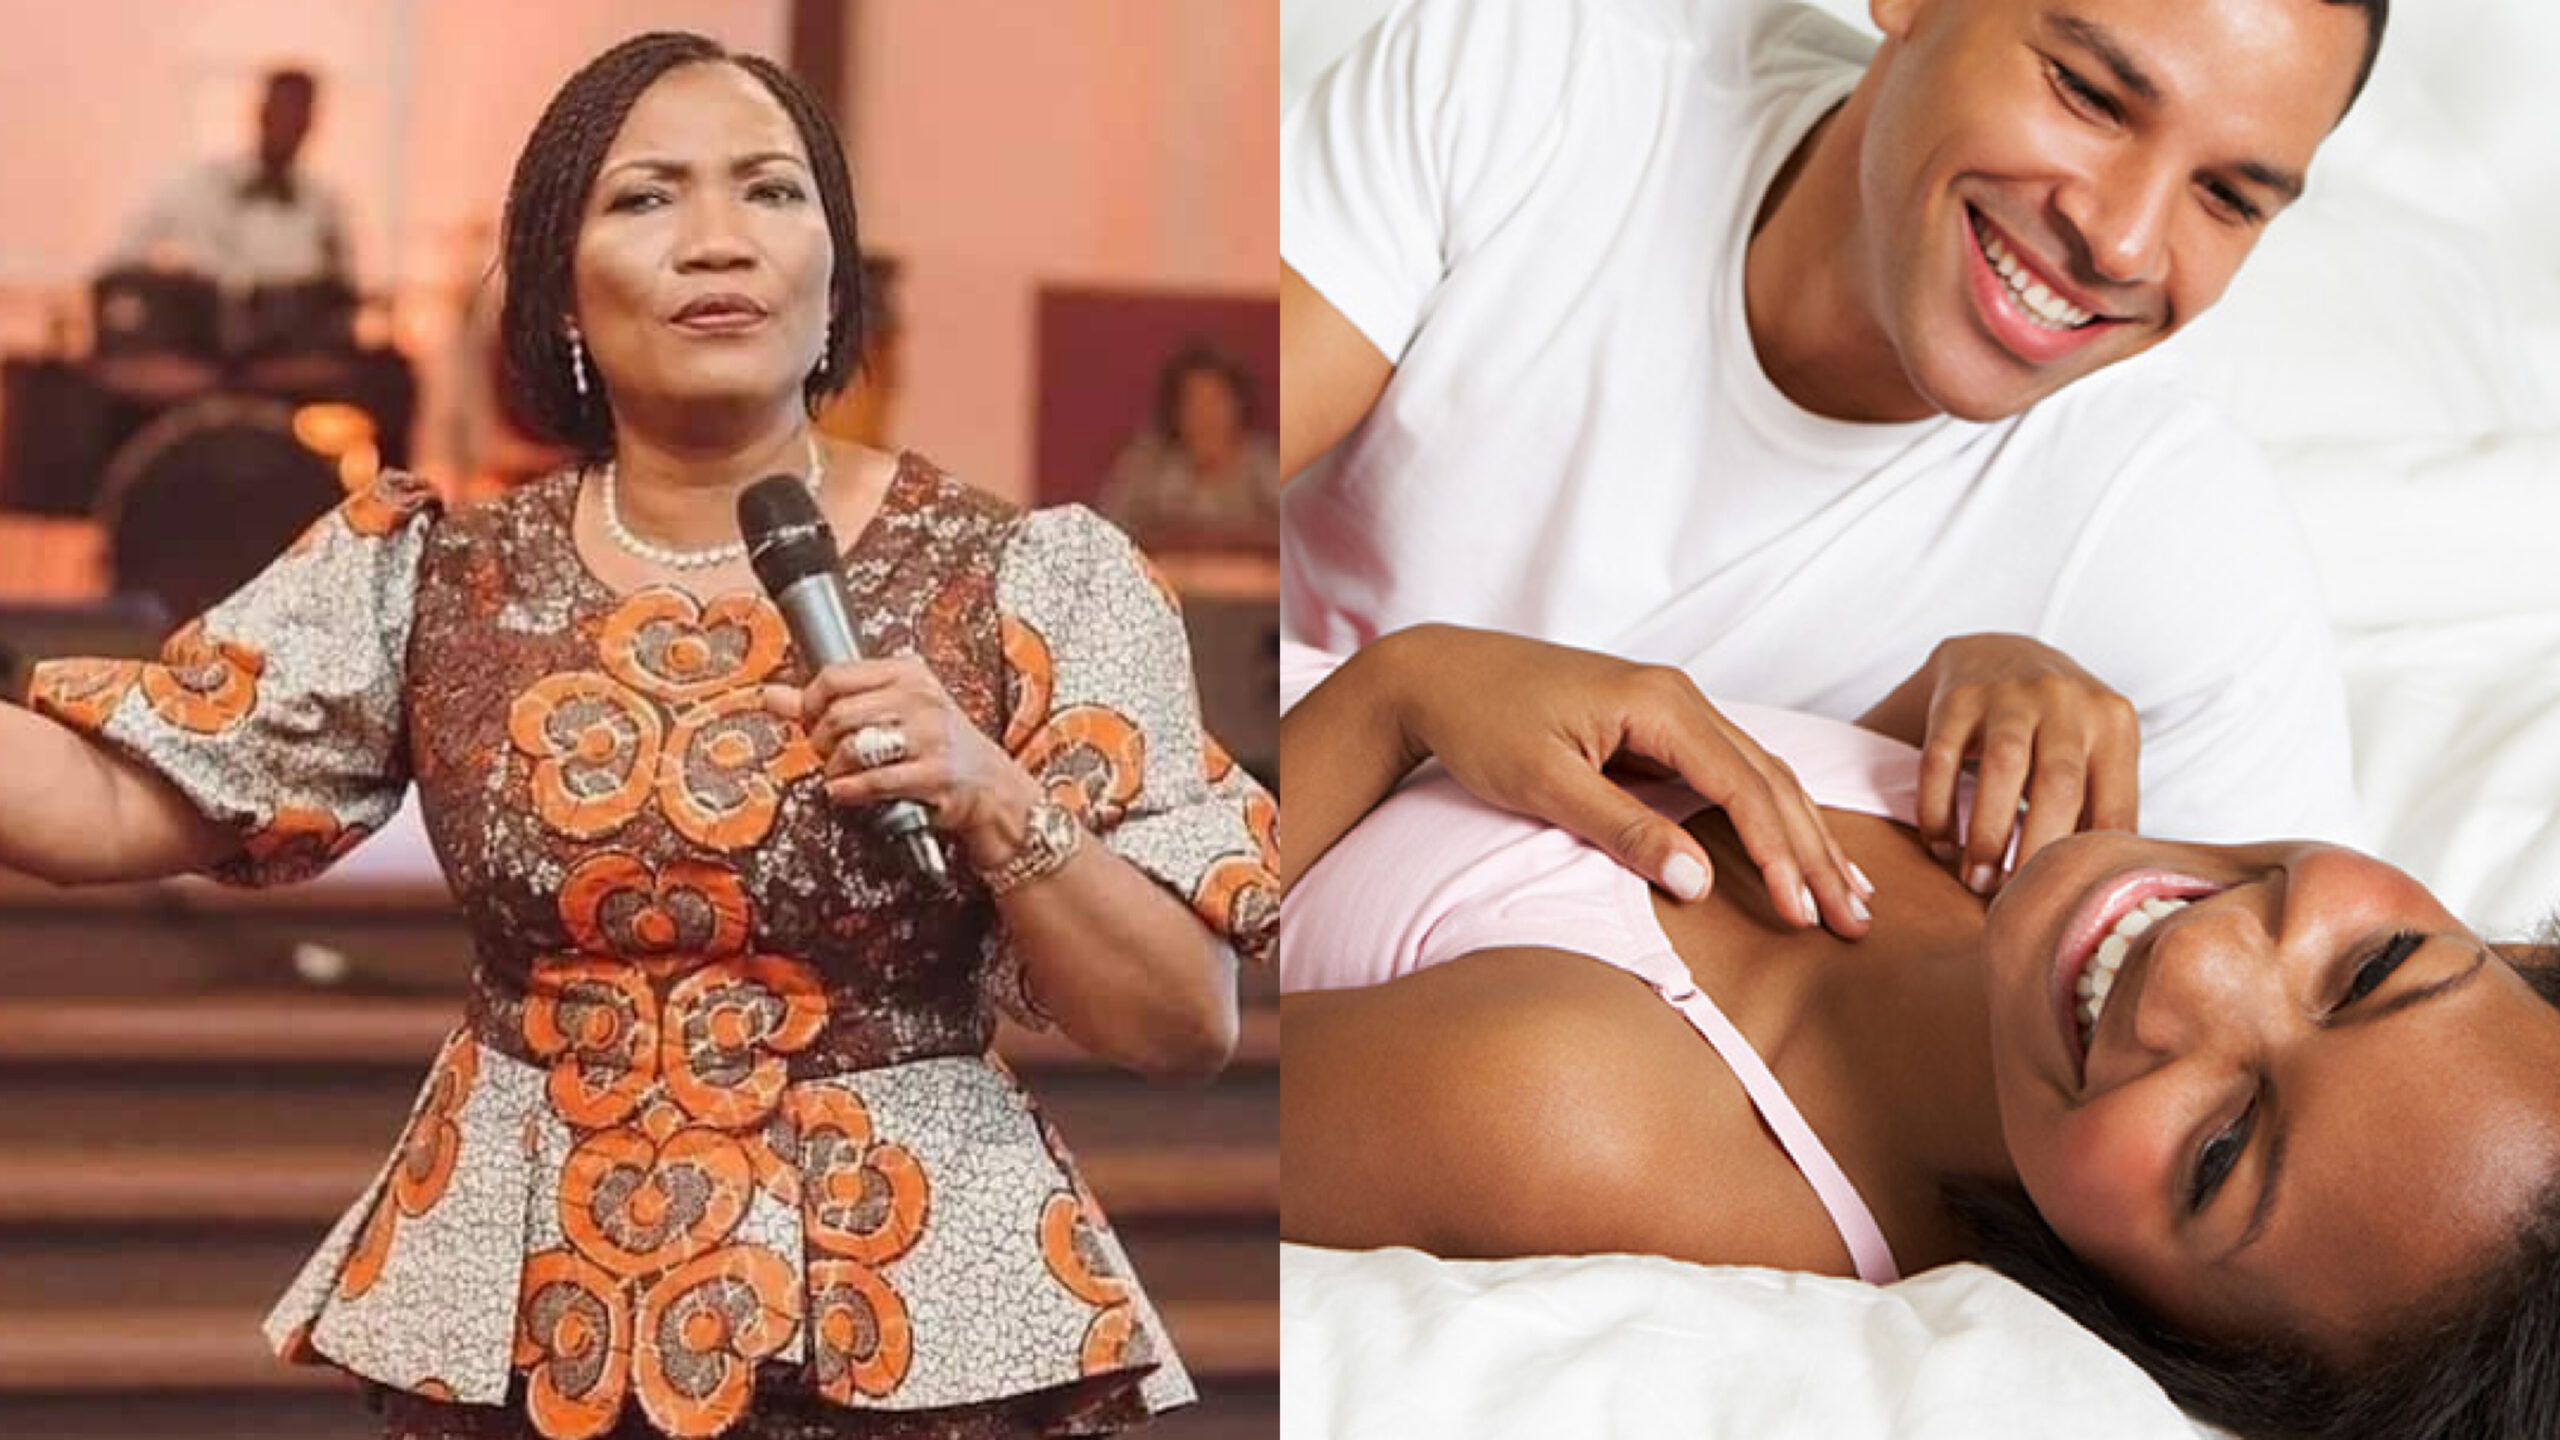 You need to thank your woman after s.ex because she gave out her body to you – Female preacher tells men in video